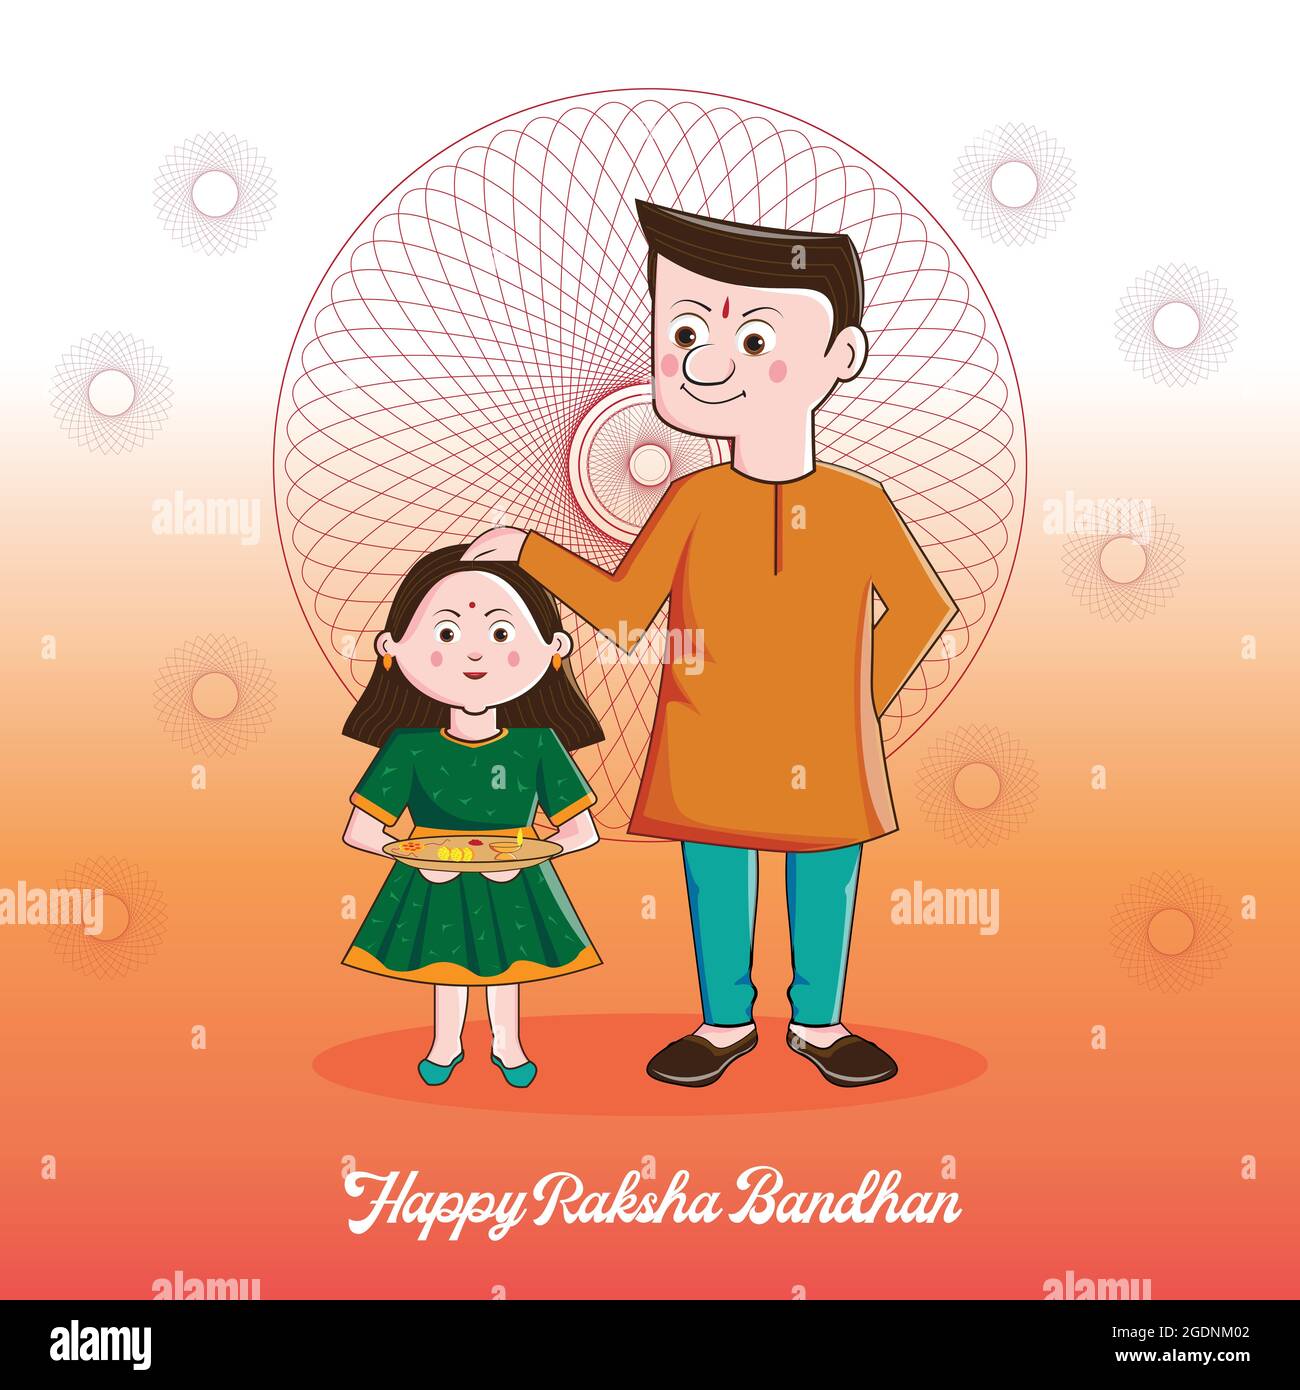 In this poster big brother blessing the little sister on the occasion of Rakshabandhan. Sister holding the thali in hand and standing with brother Stock Vector